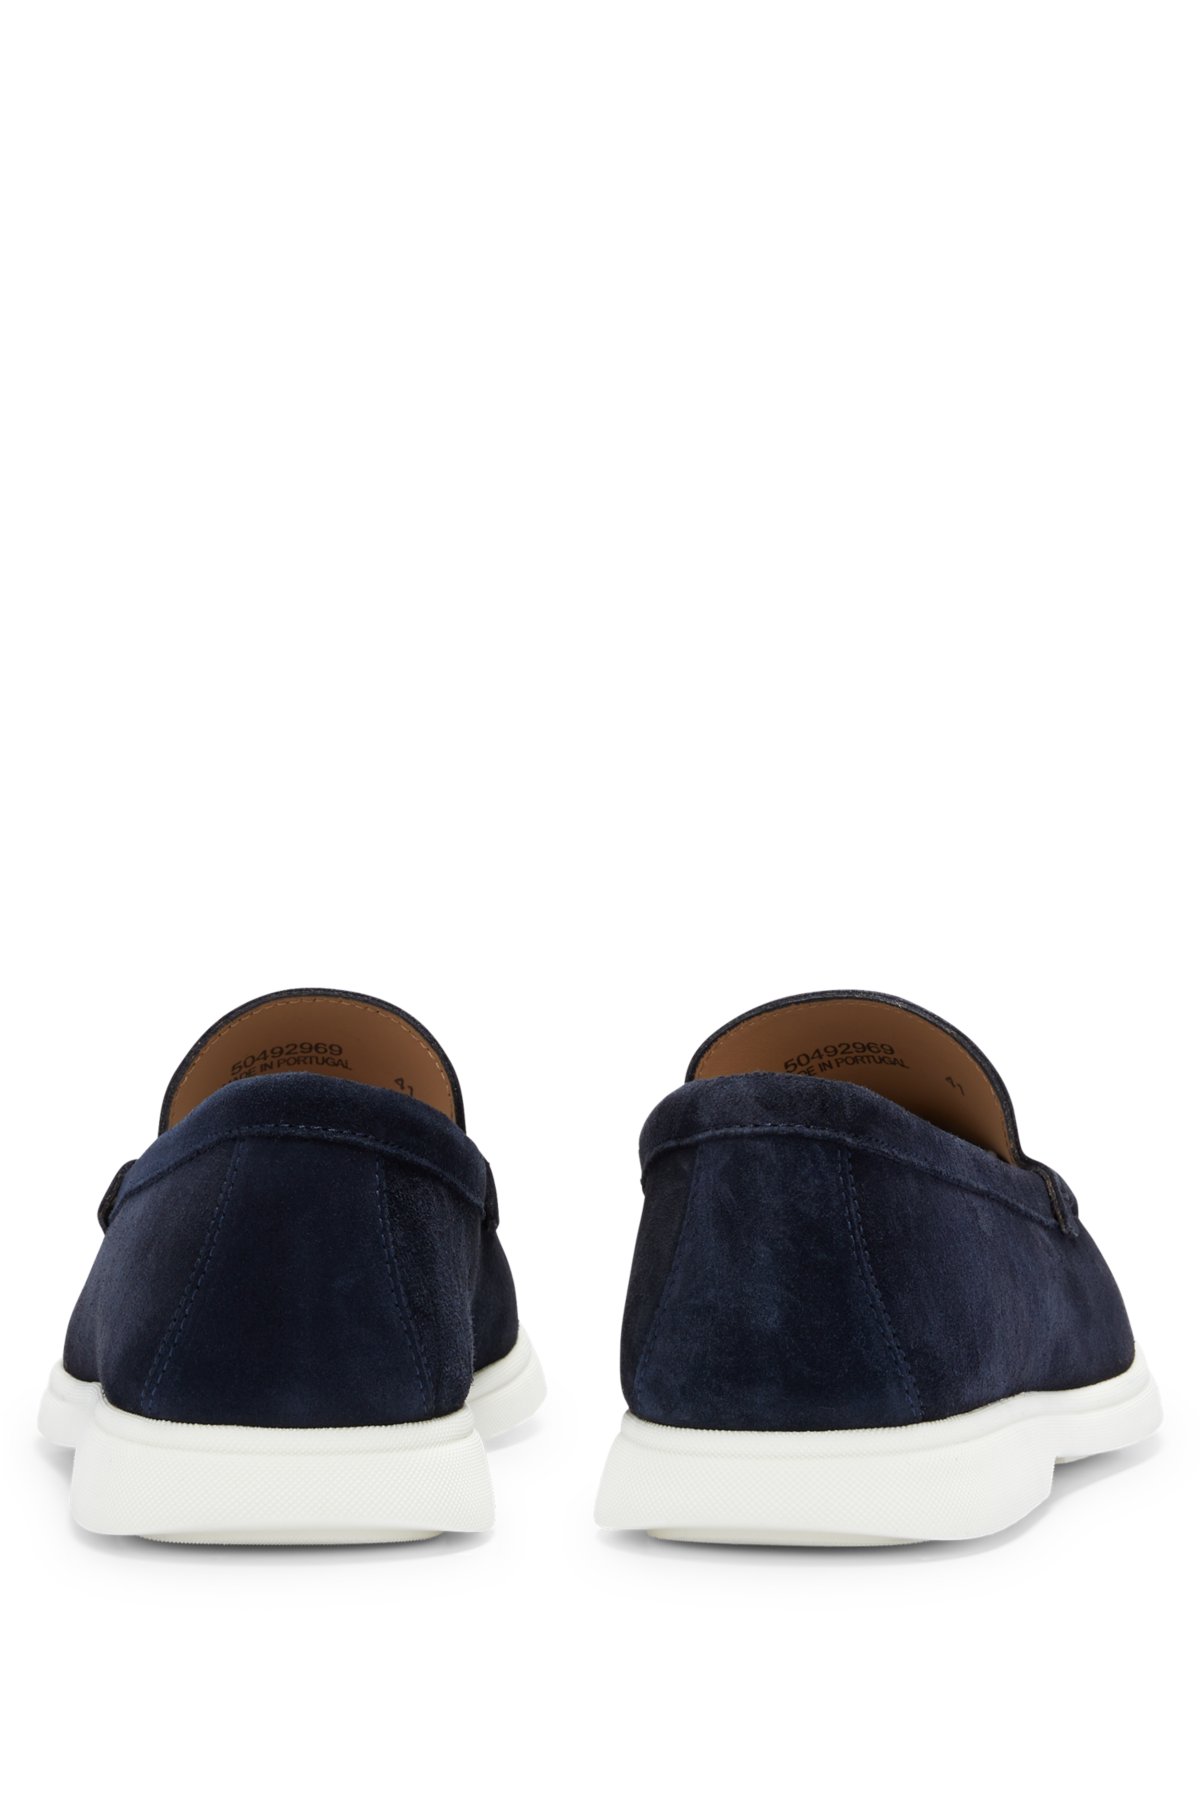 fordelagtige Sprængstoffer analog BOSS - Suede loafers with embossed logo and TPU outsole